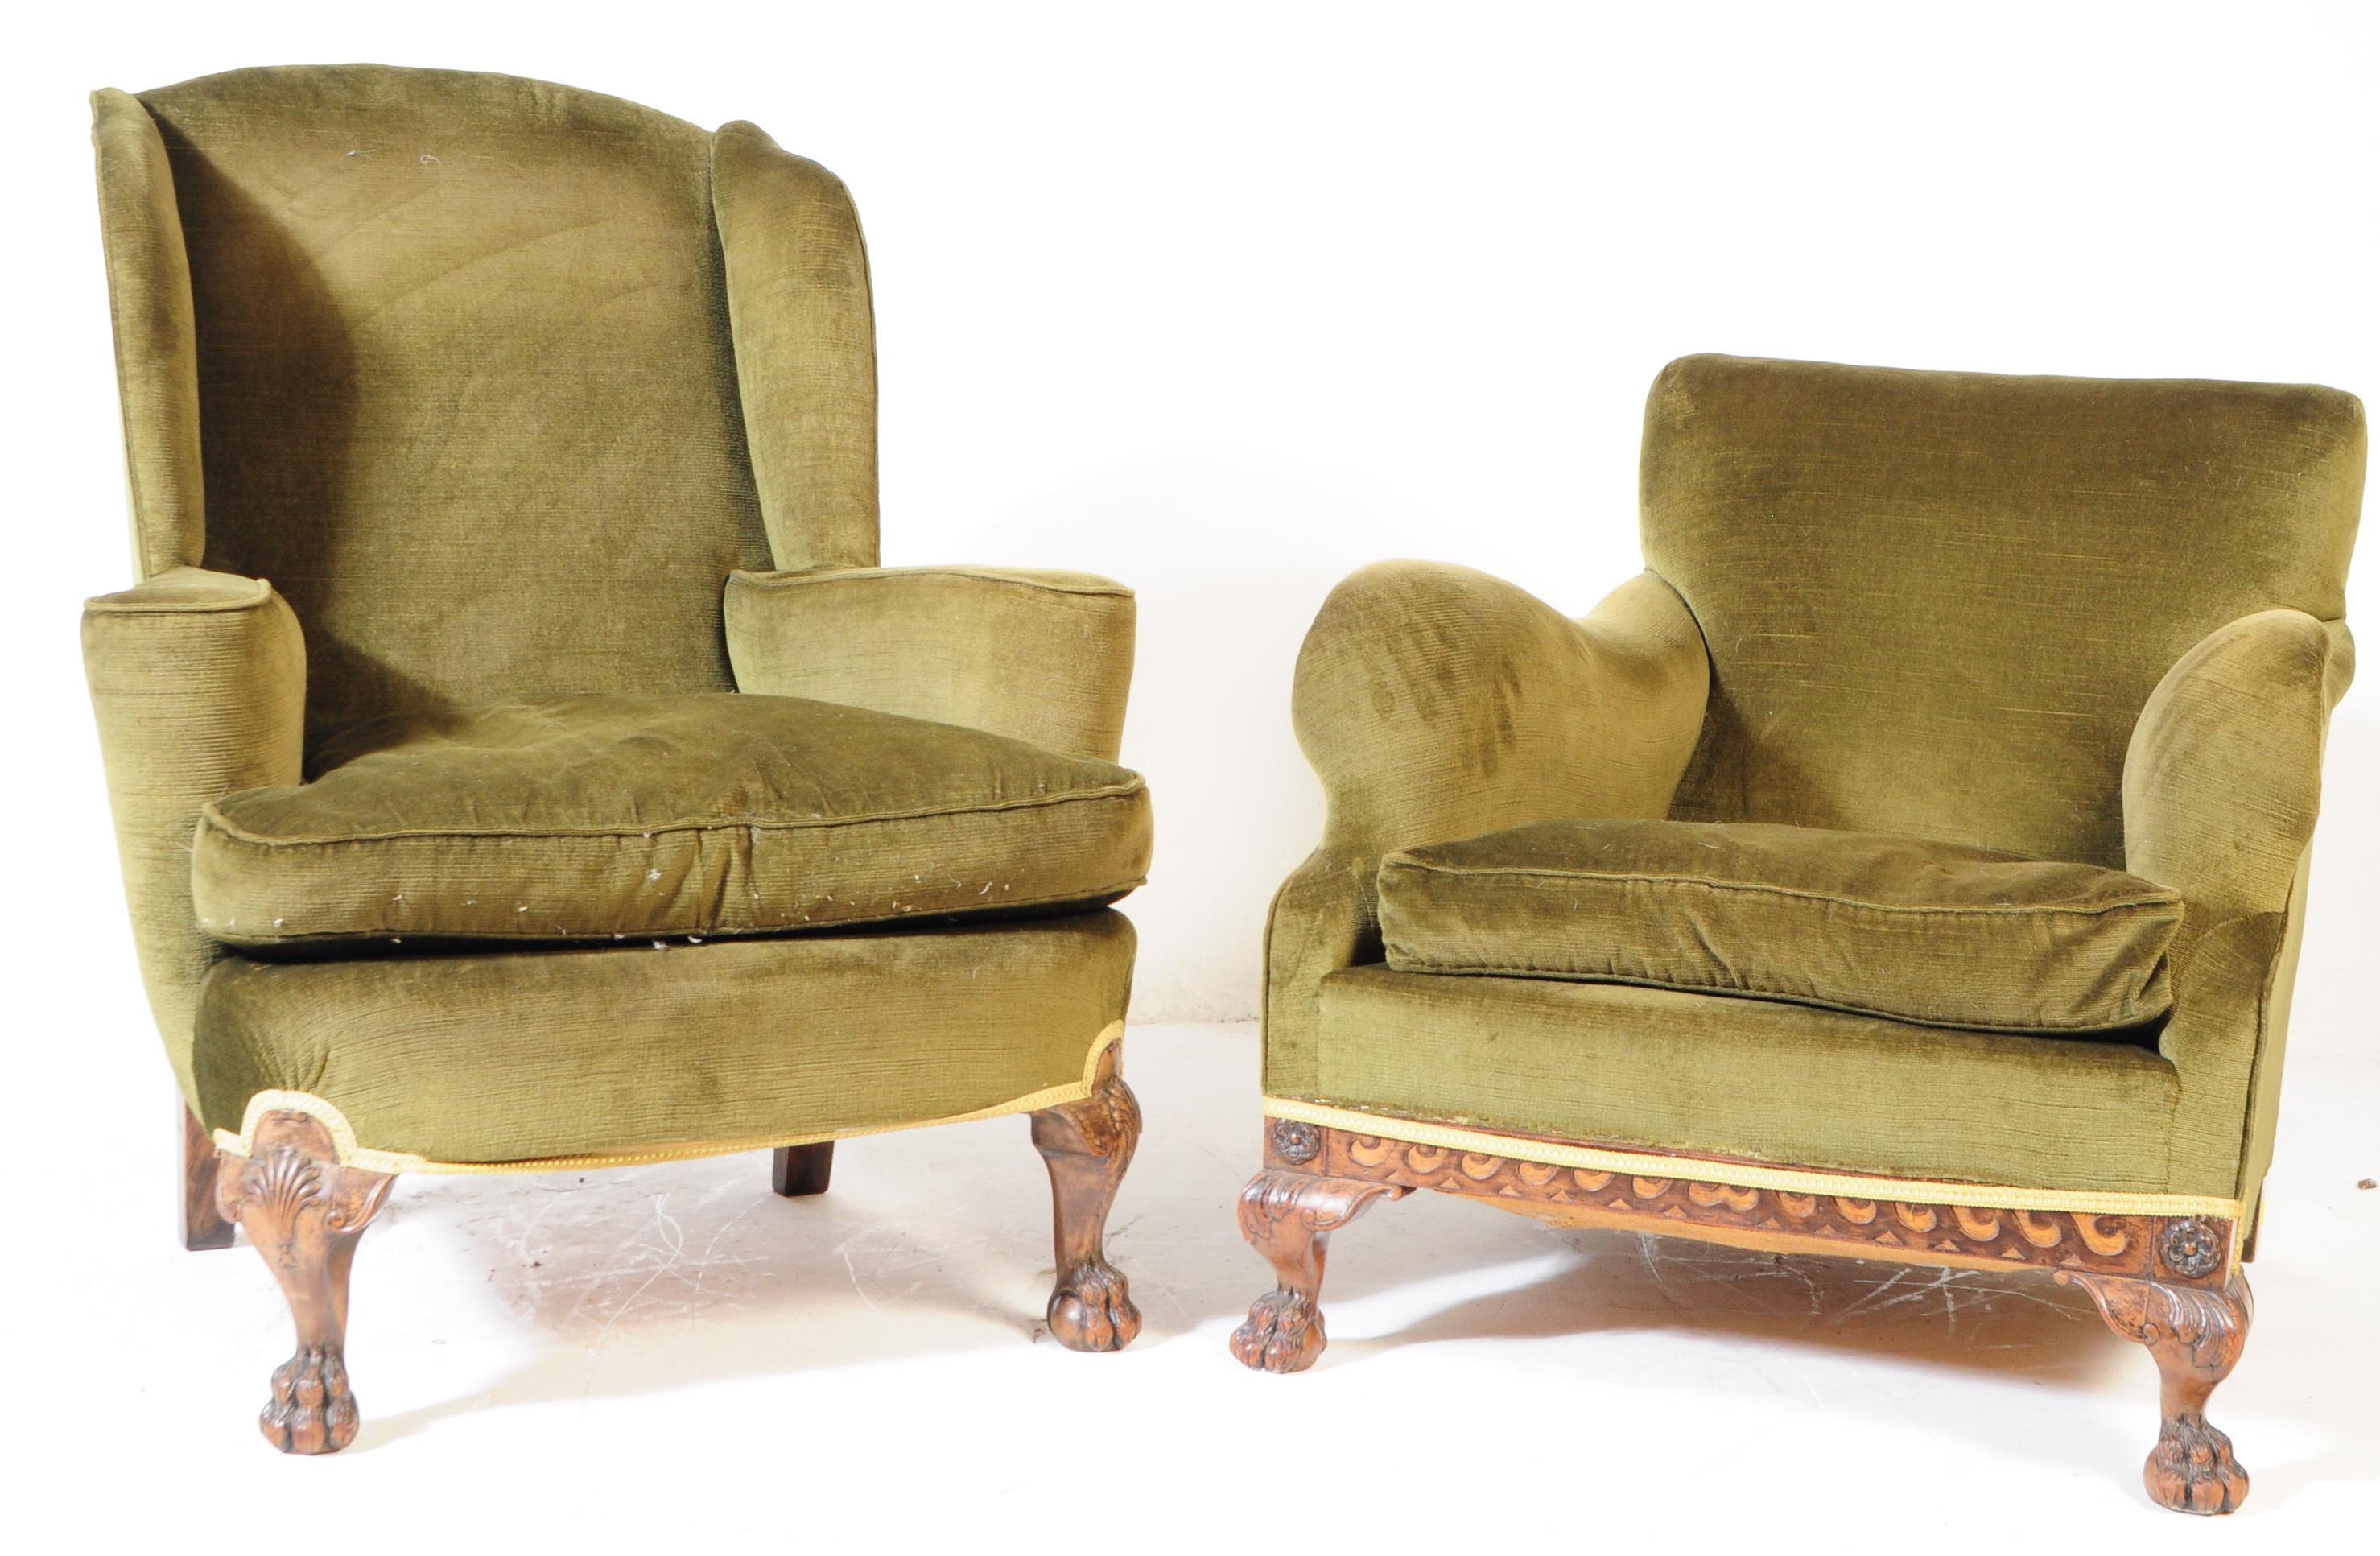 TWO VINTAGE 20TH CENTURY HIS & HERS FIRESIDE ARMCHAIRS